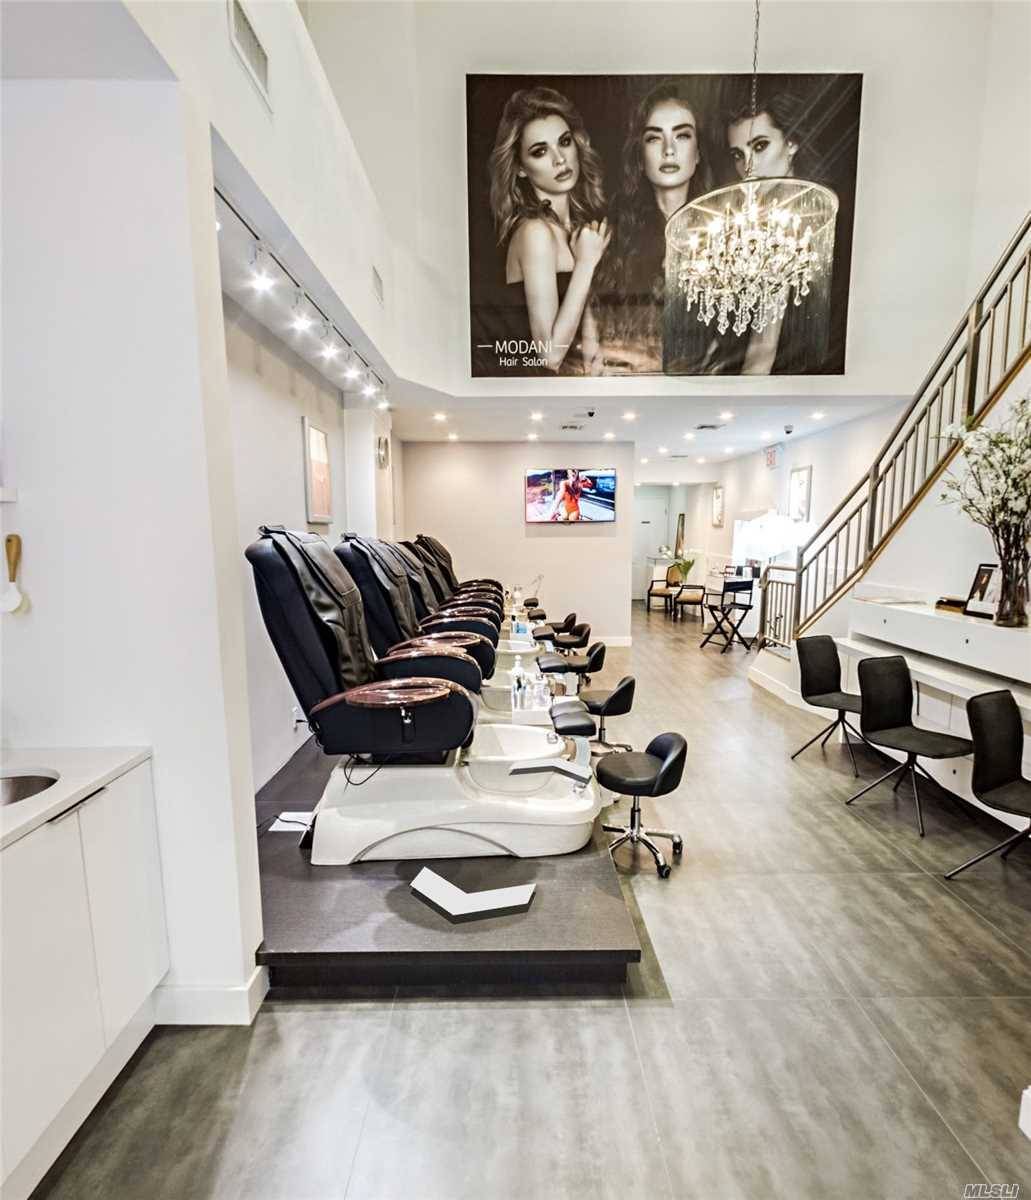 Upscale full service Spa and beautiful Salon located in very high traffic area, operated on 4000 SF with below market rent of 9000.